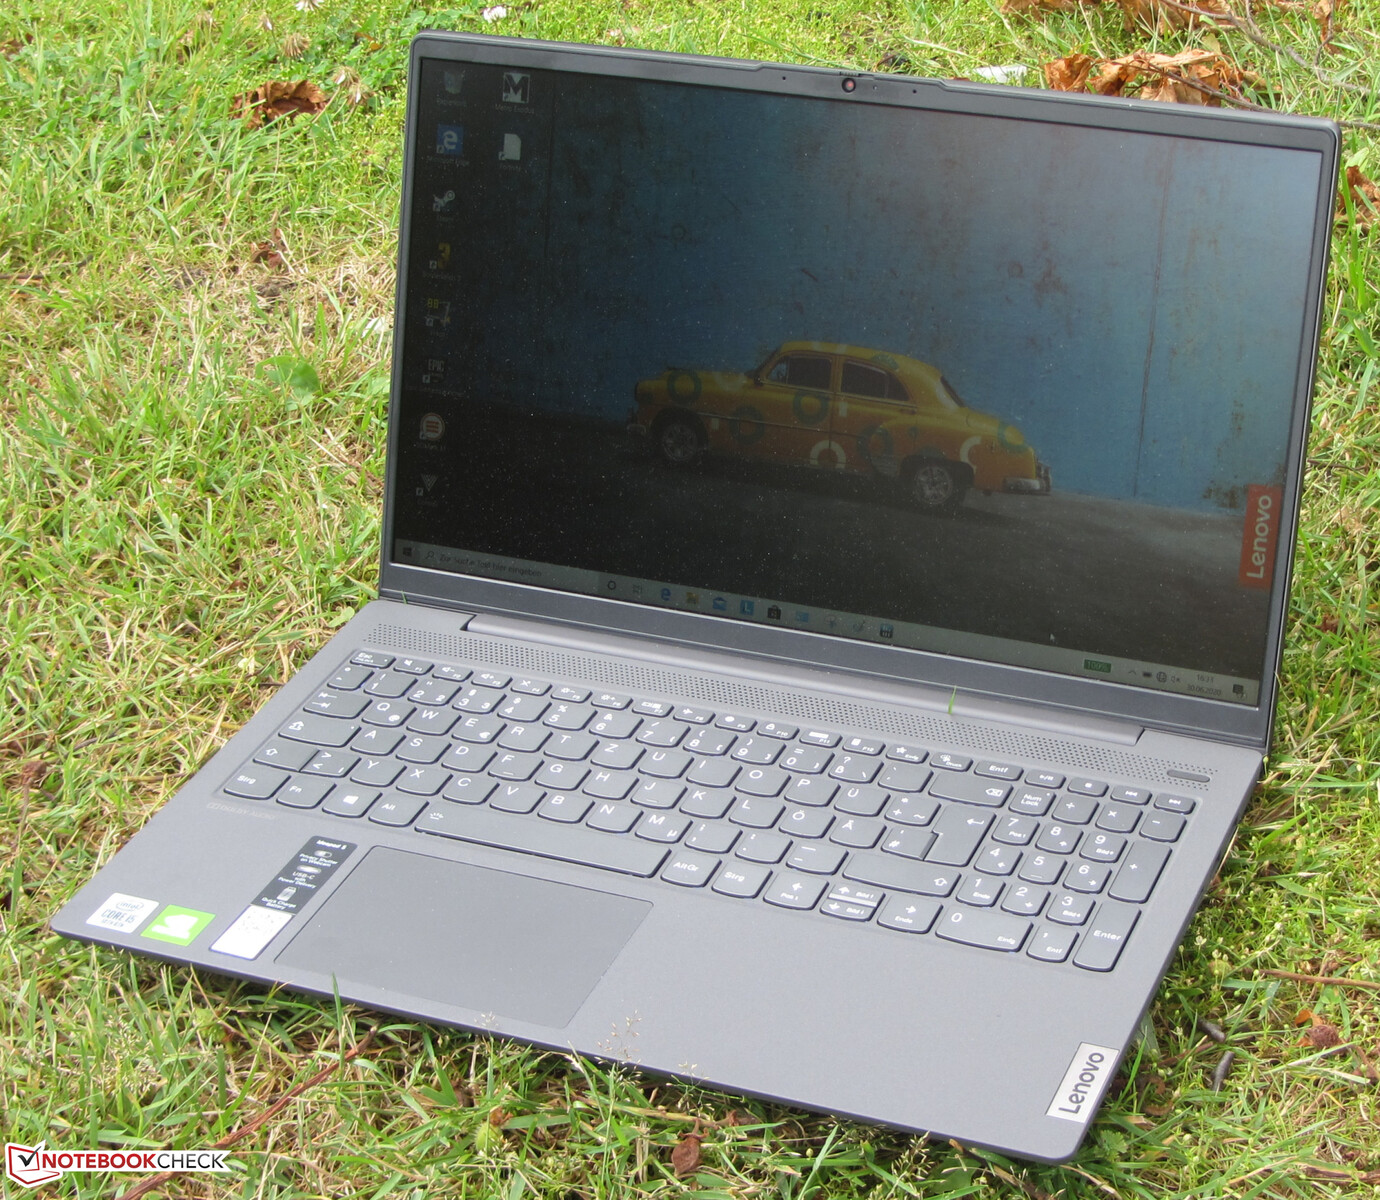 The Lenovo Ideapad 5 15IIL05 comes close to entry-level gaming